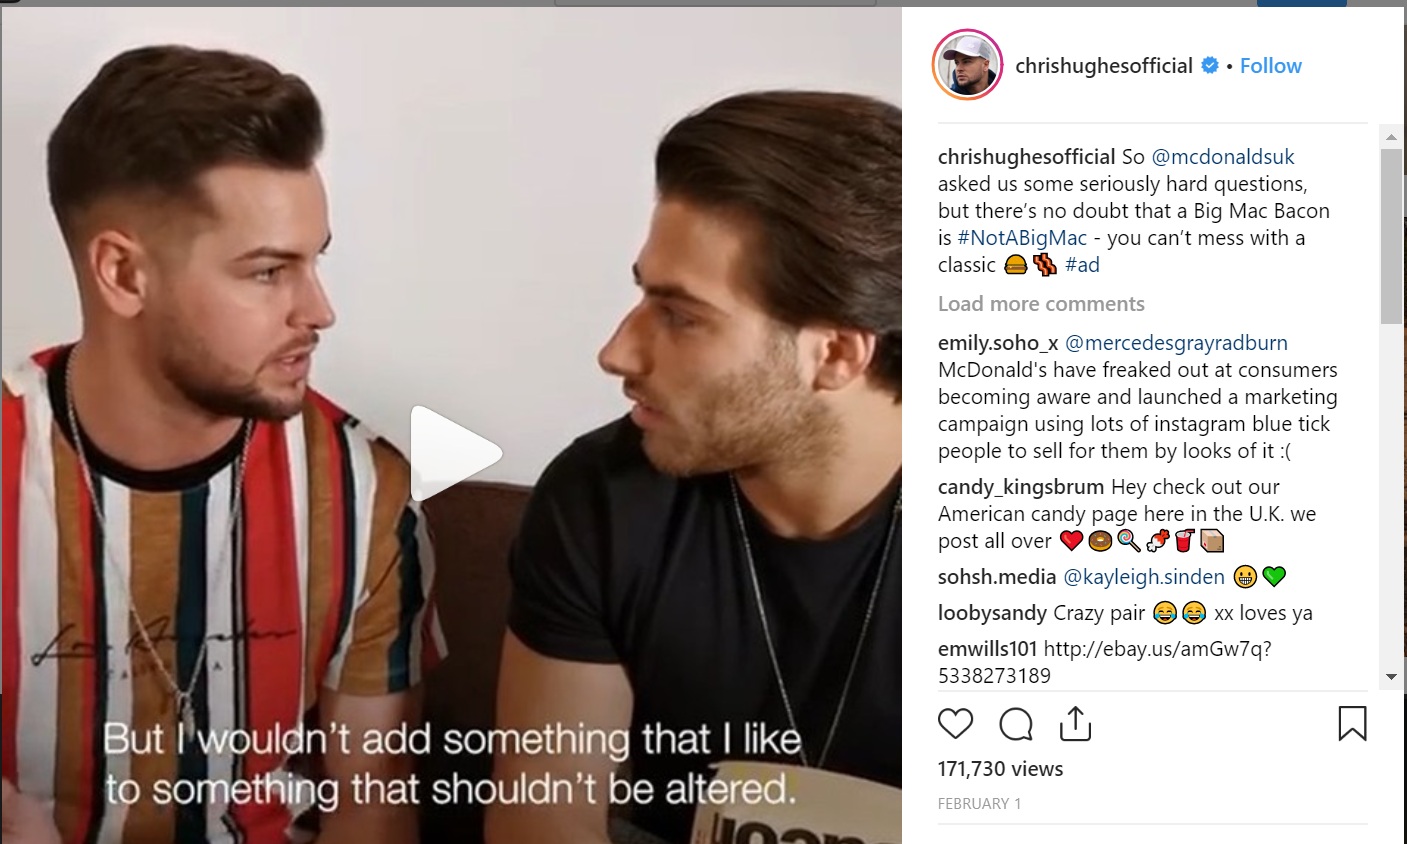 I was previously of the view that Instagram was the preserve of reality TV stars, like Chris and Kem of Love Island and Celebrity Hunted fame (of course I only know them from the latter).